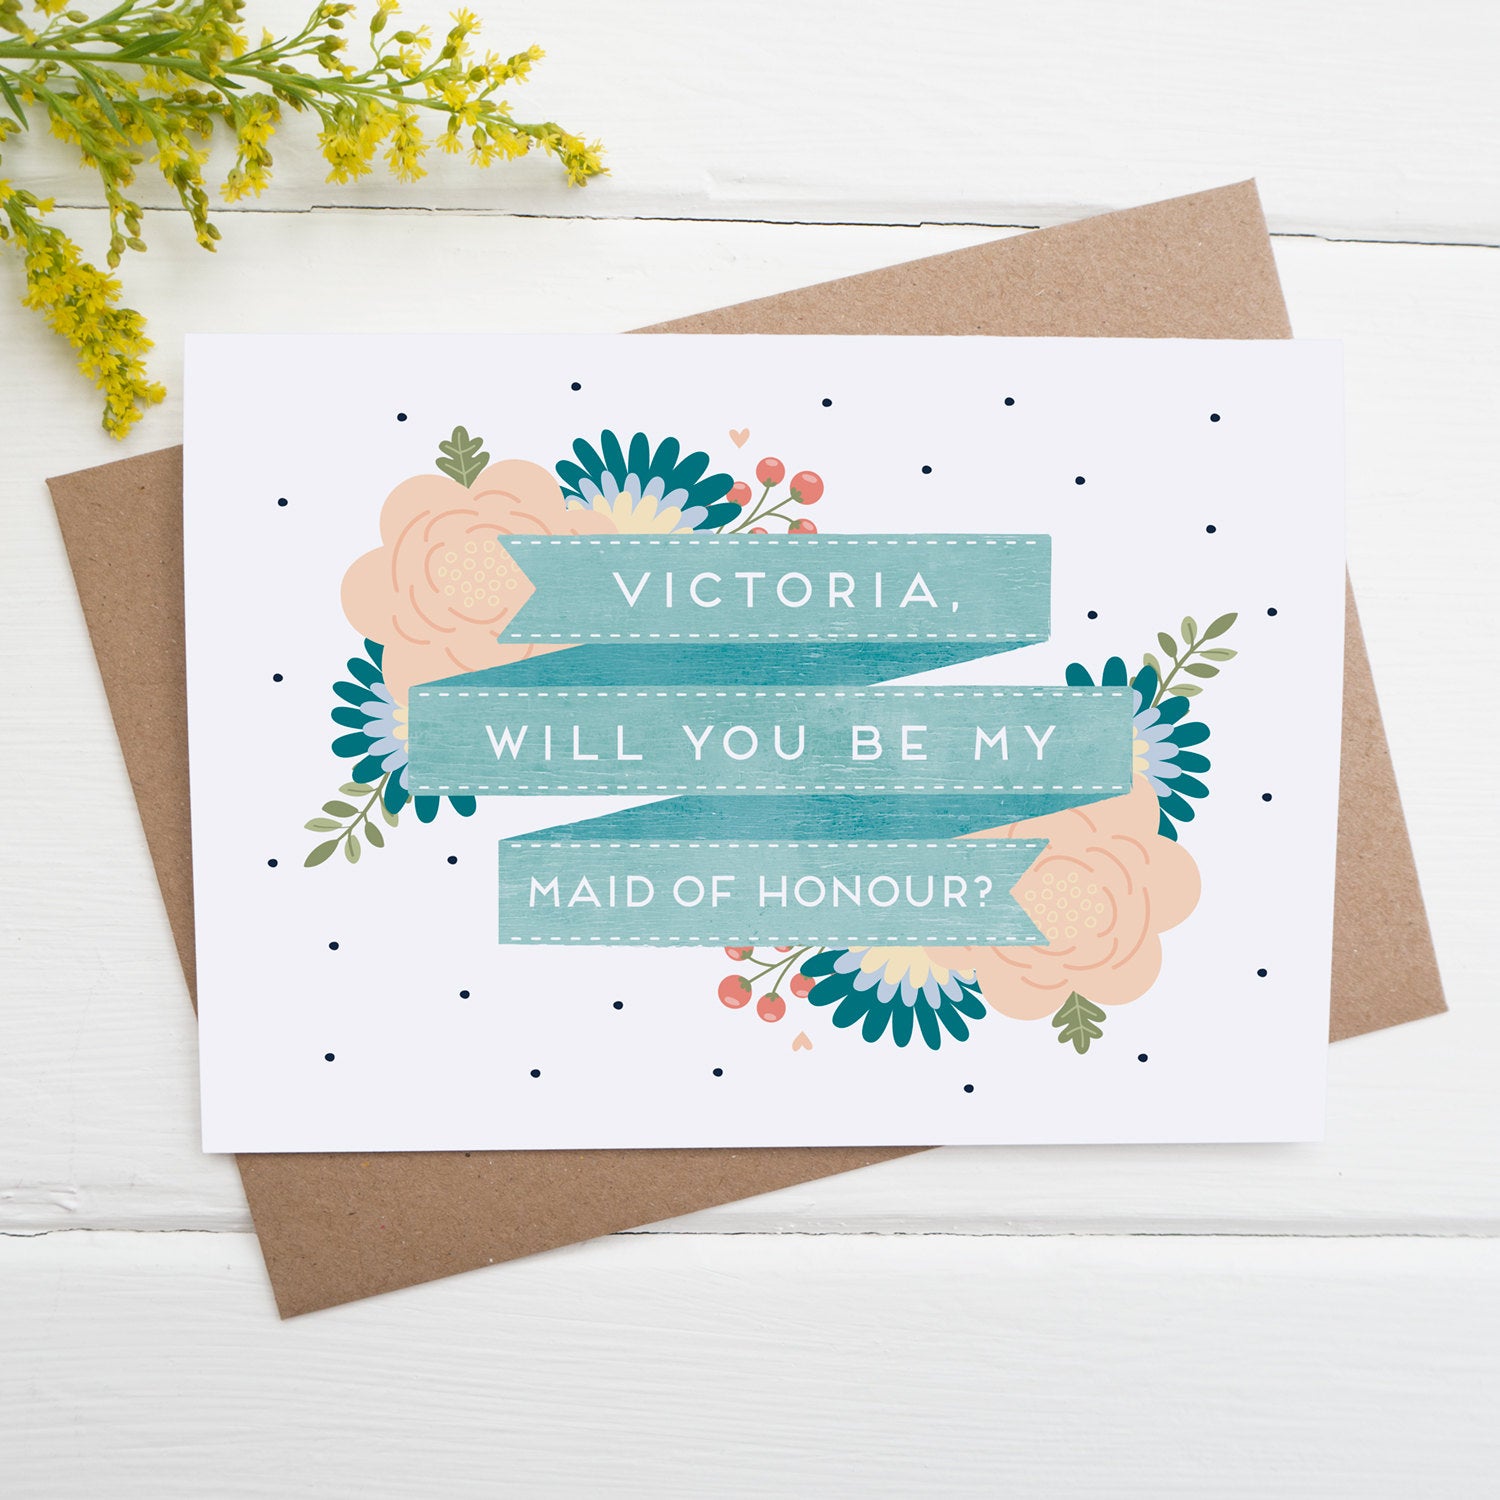 Personalised will you be my maid of honour card in blue